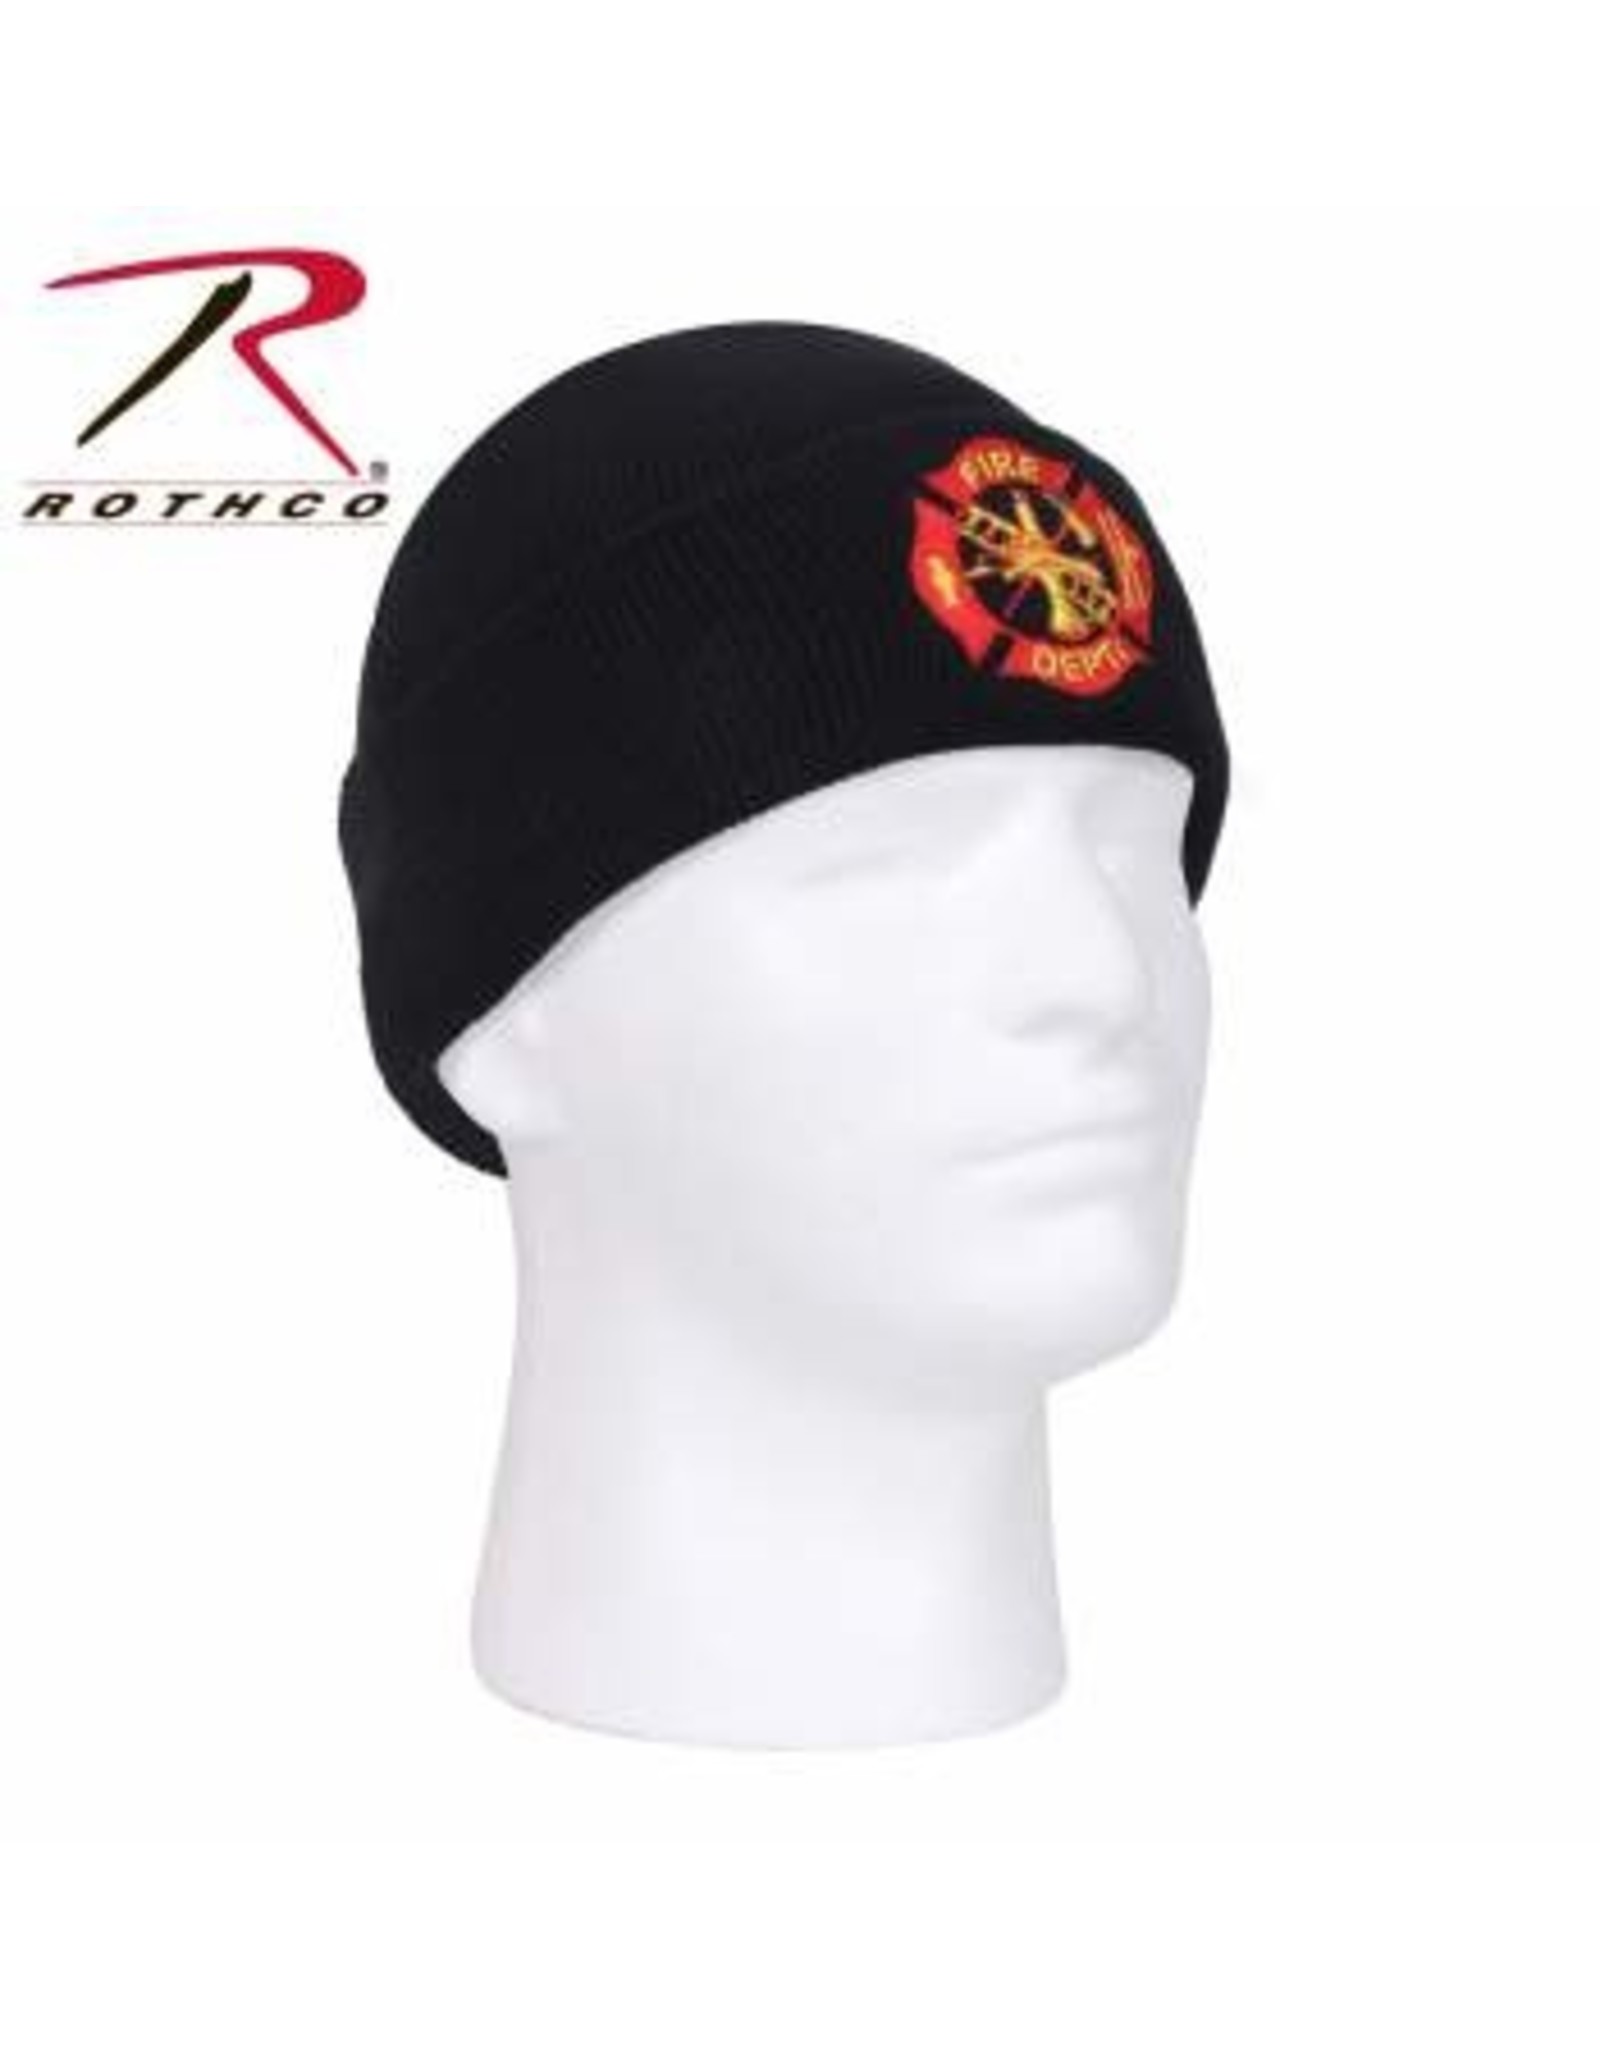 ROTHCO Rothco Deluxe Fire Department Embroidered Watch Cap